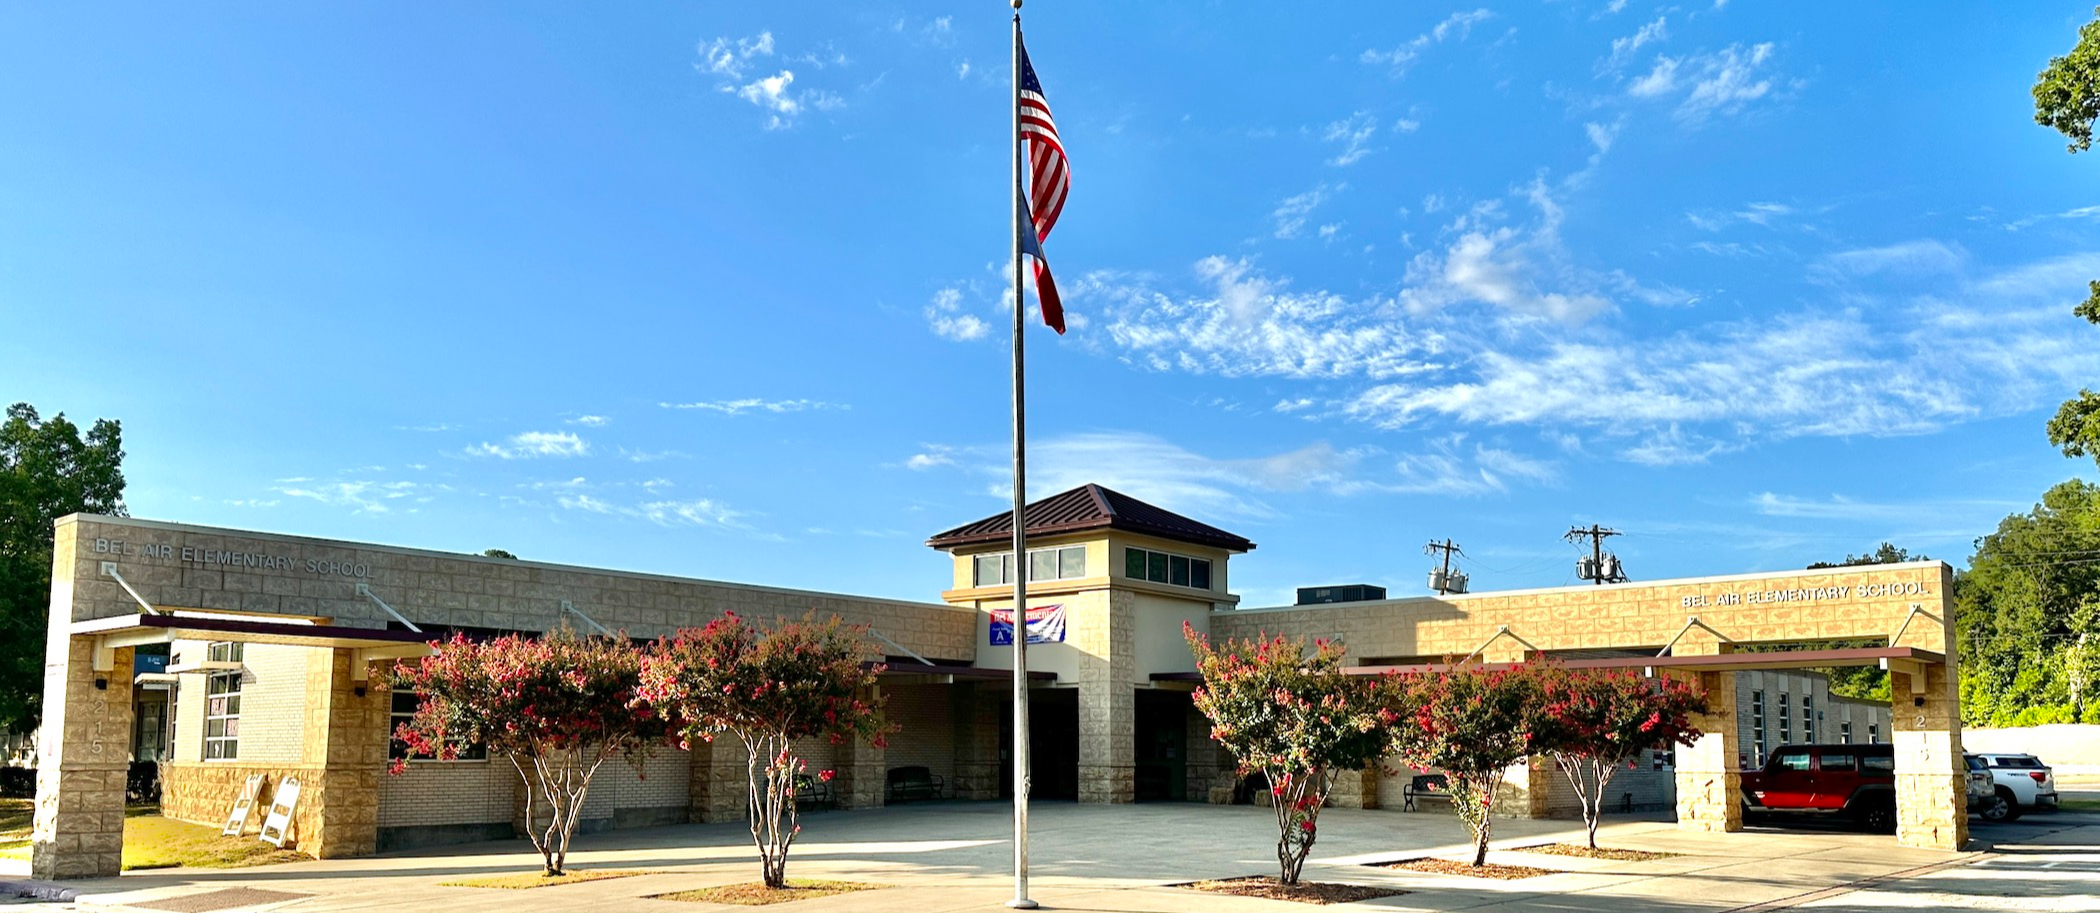 A photo of the outside of the main entrance of Bel Air Elementary